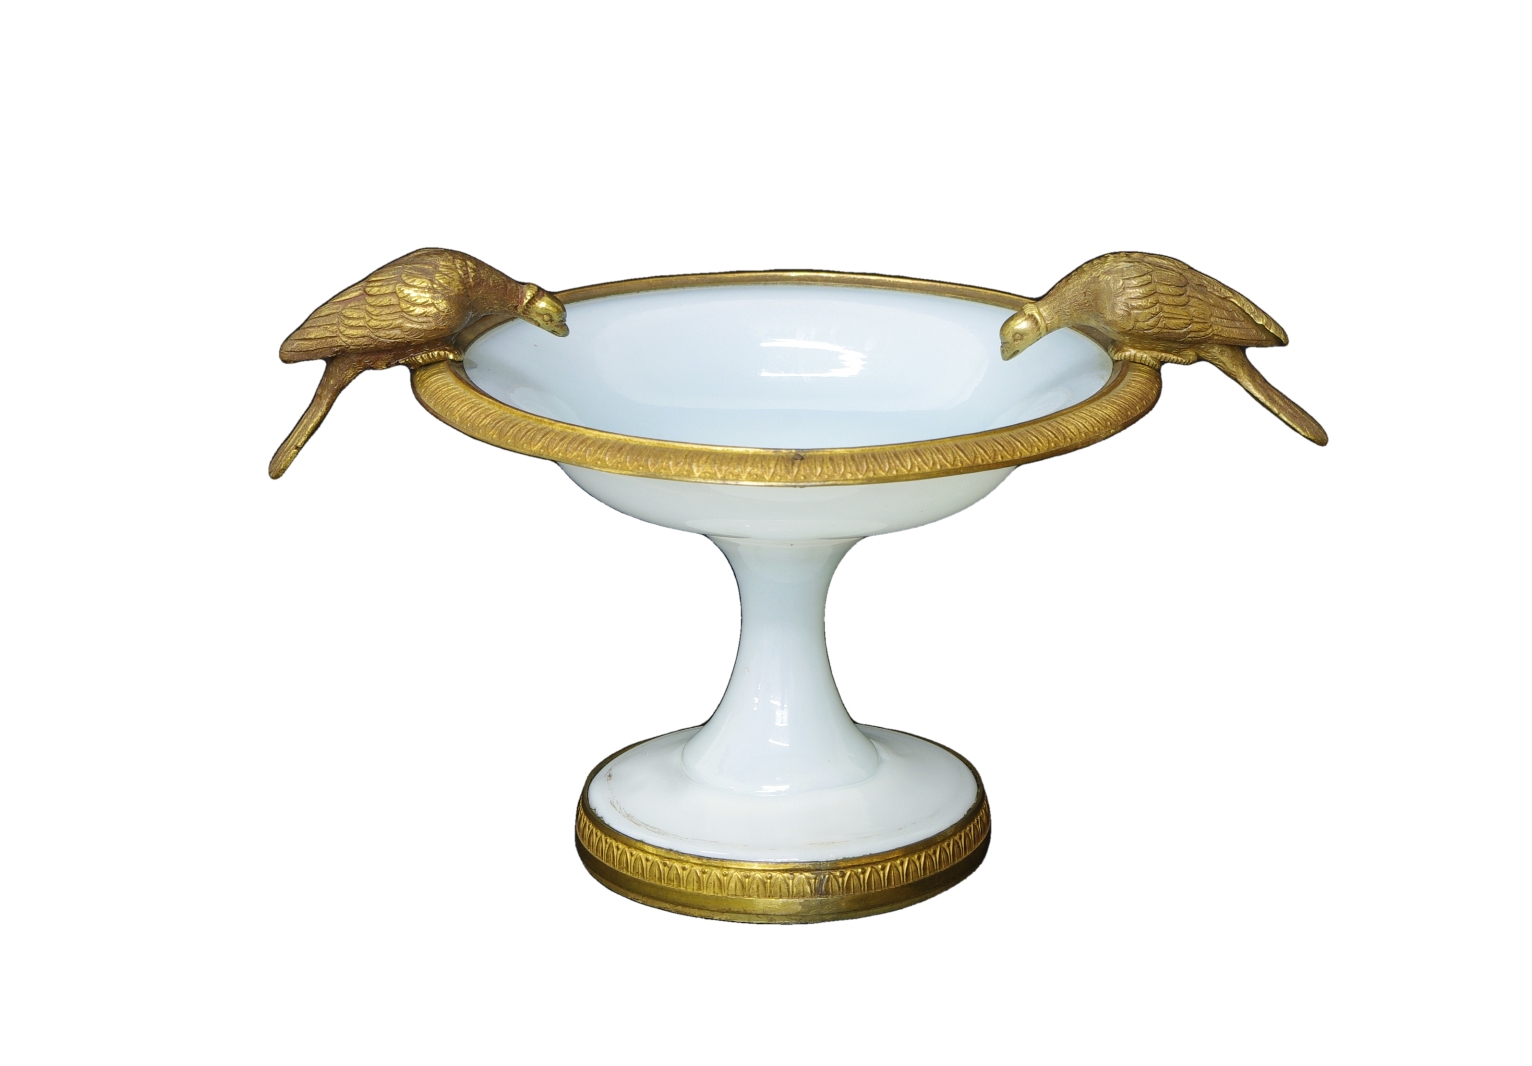 Charles X White Opaline Coupe, c. 1825